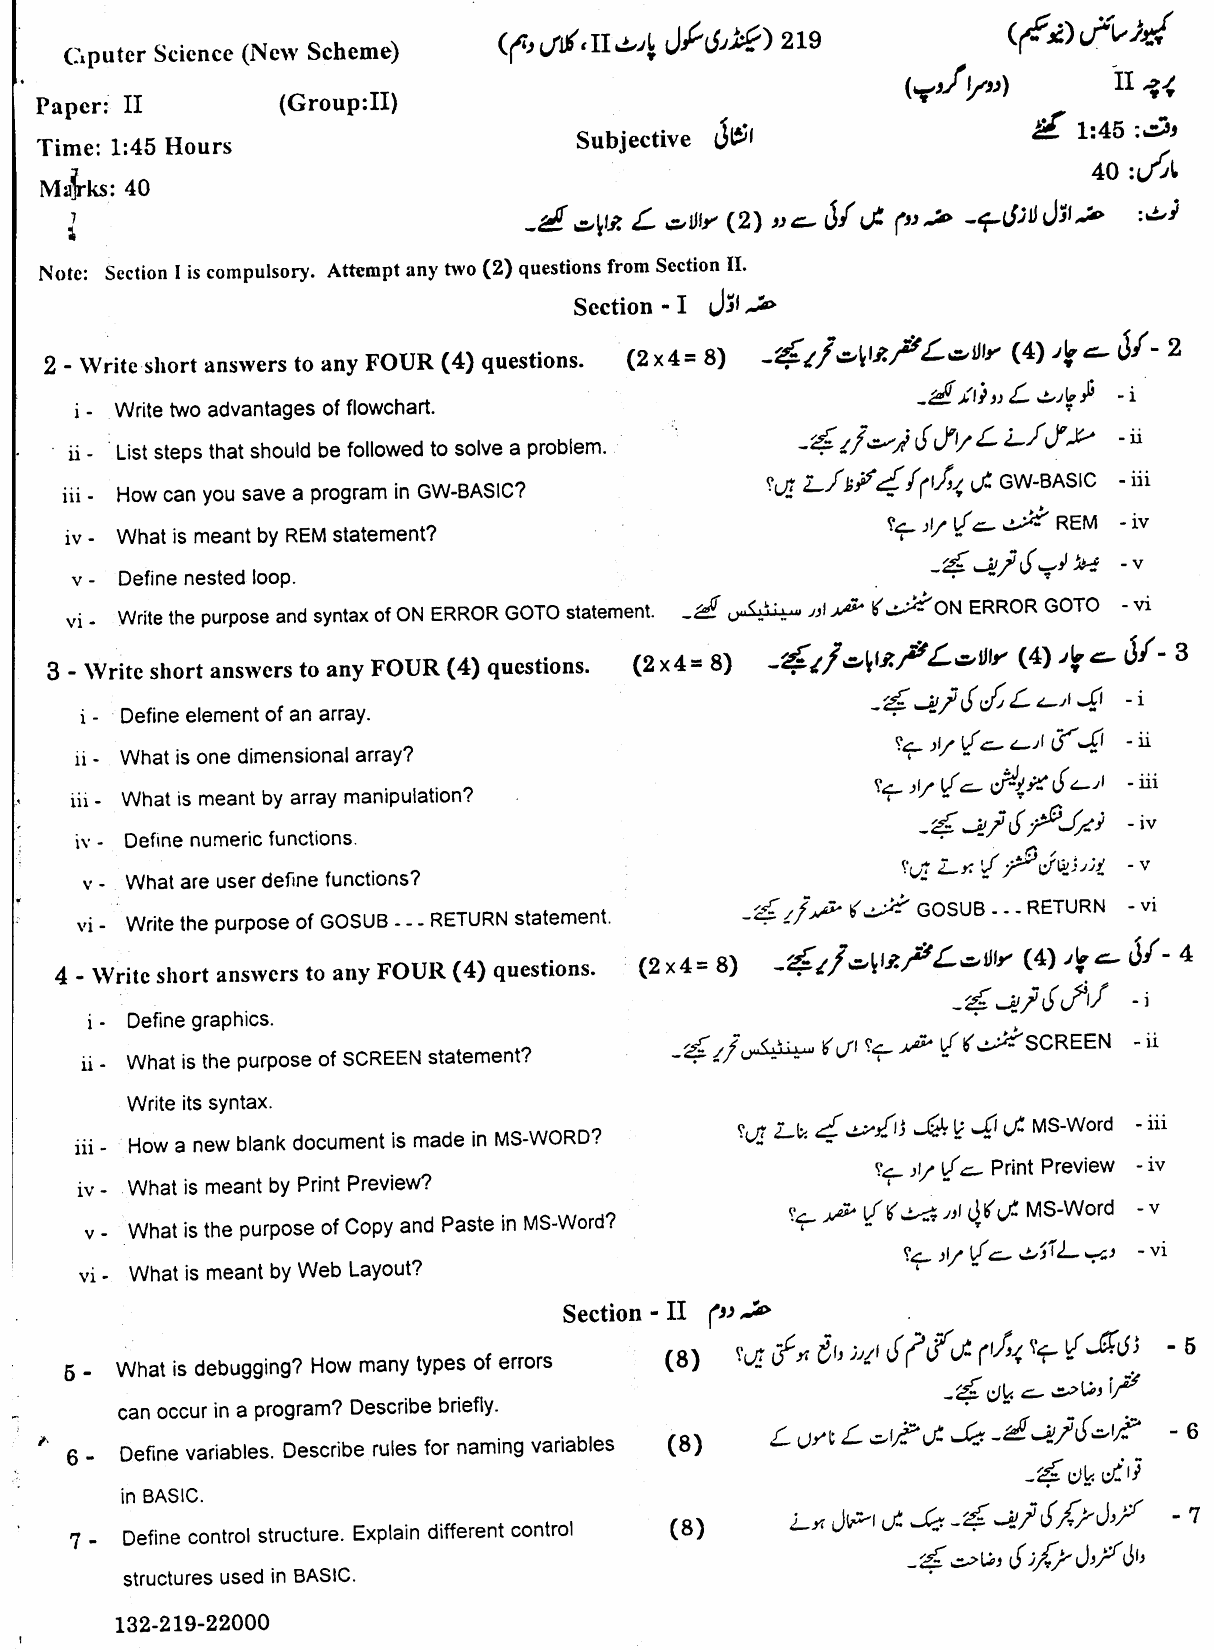 10th Class Computer Science Paper 2019 Gujranwala Board Subjective Group 2